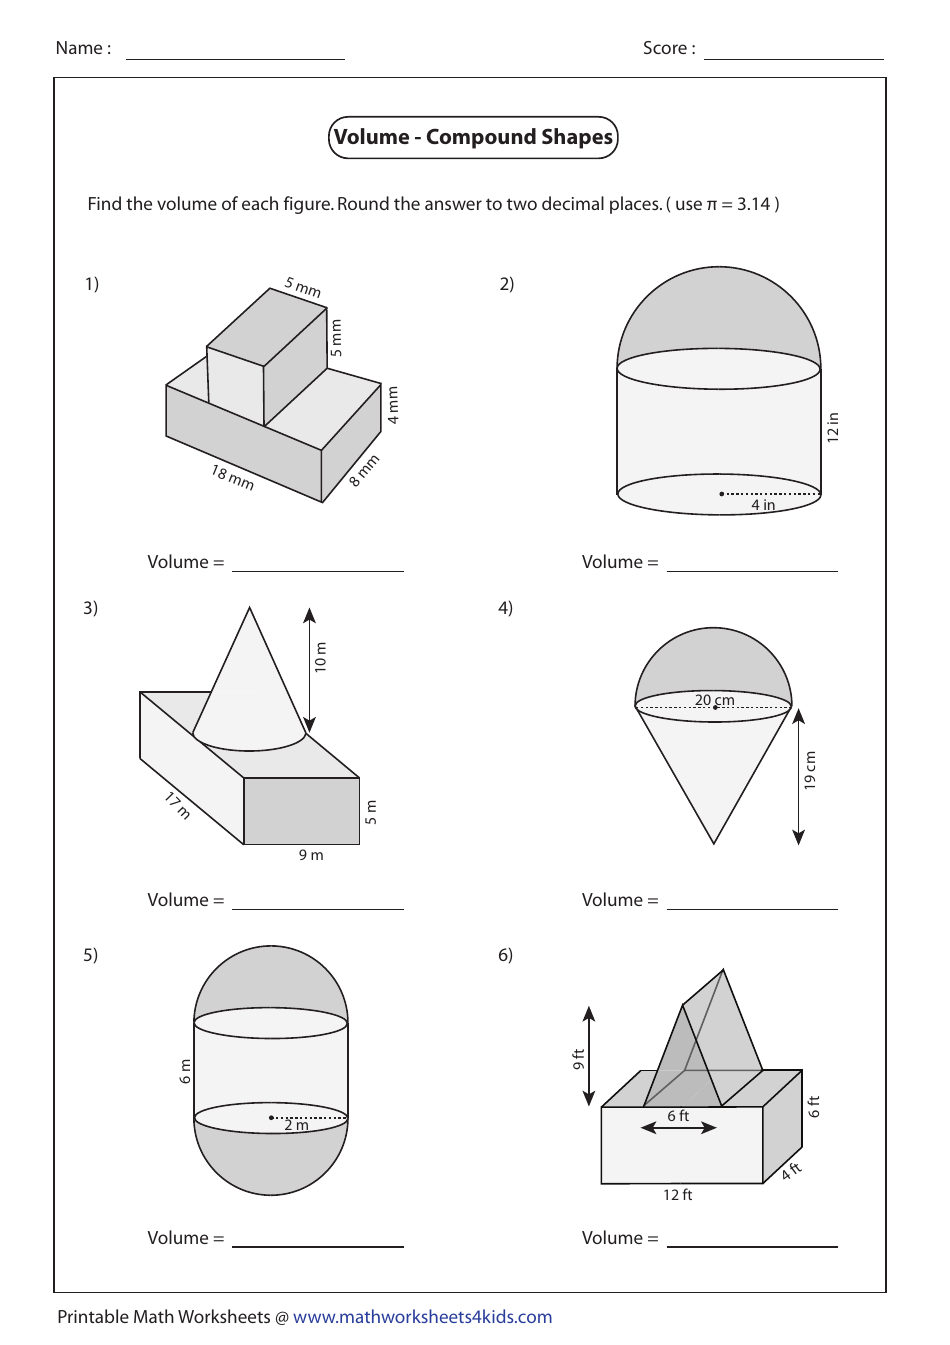 Volume - Compound Shapes Worksheet With Answers